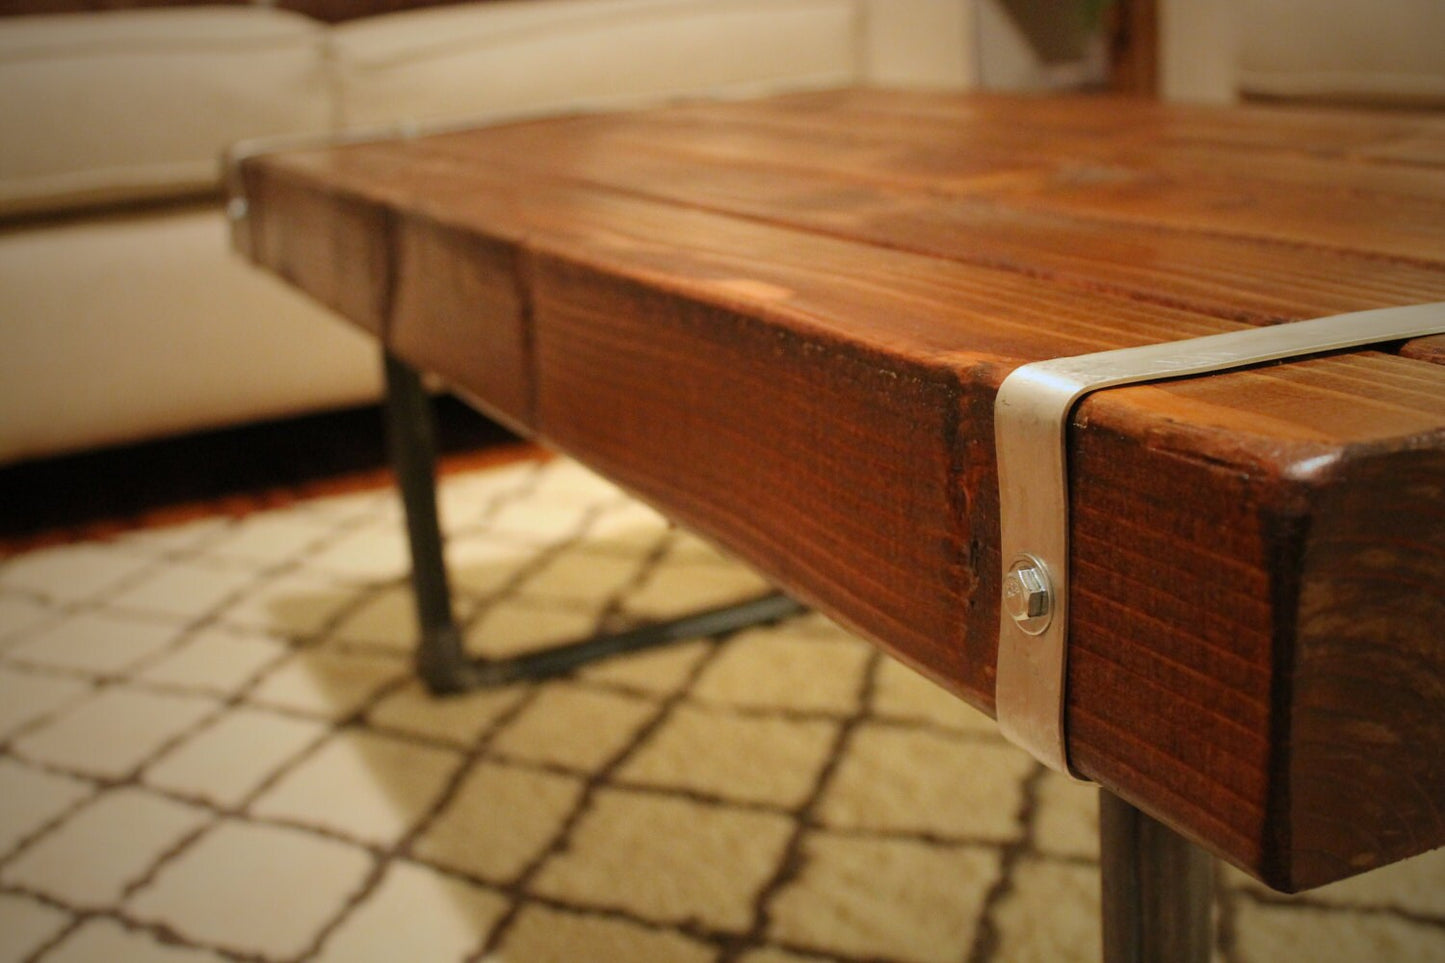 Steel and Wood Coffee Table - 3.5in Thick Table Top